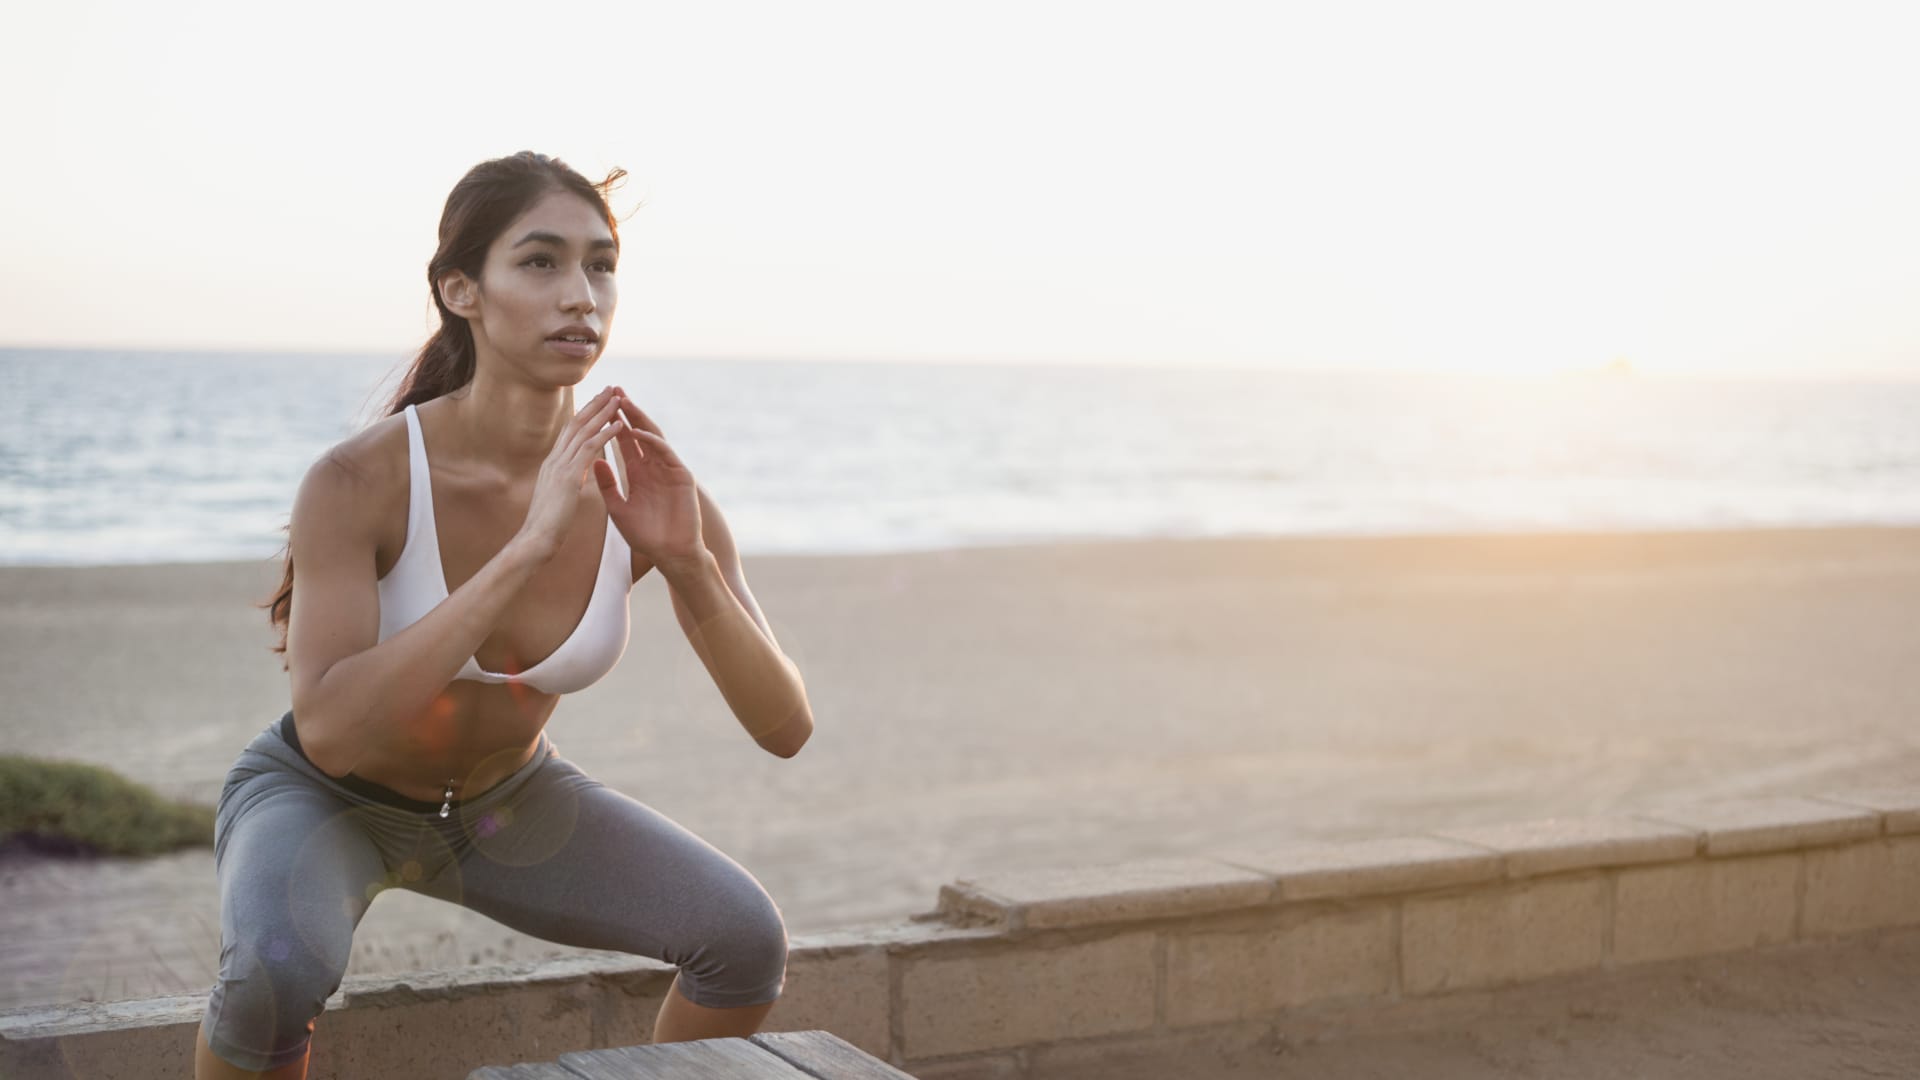 16 exercises you can do from anywhere